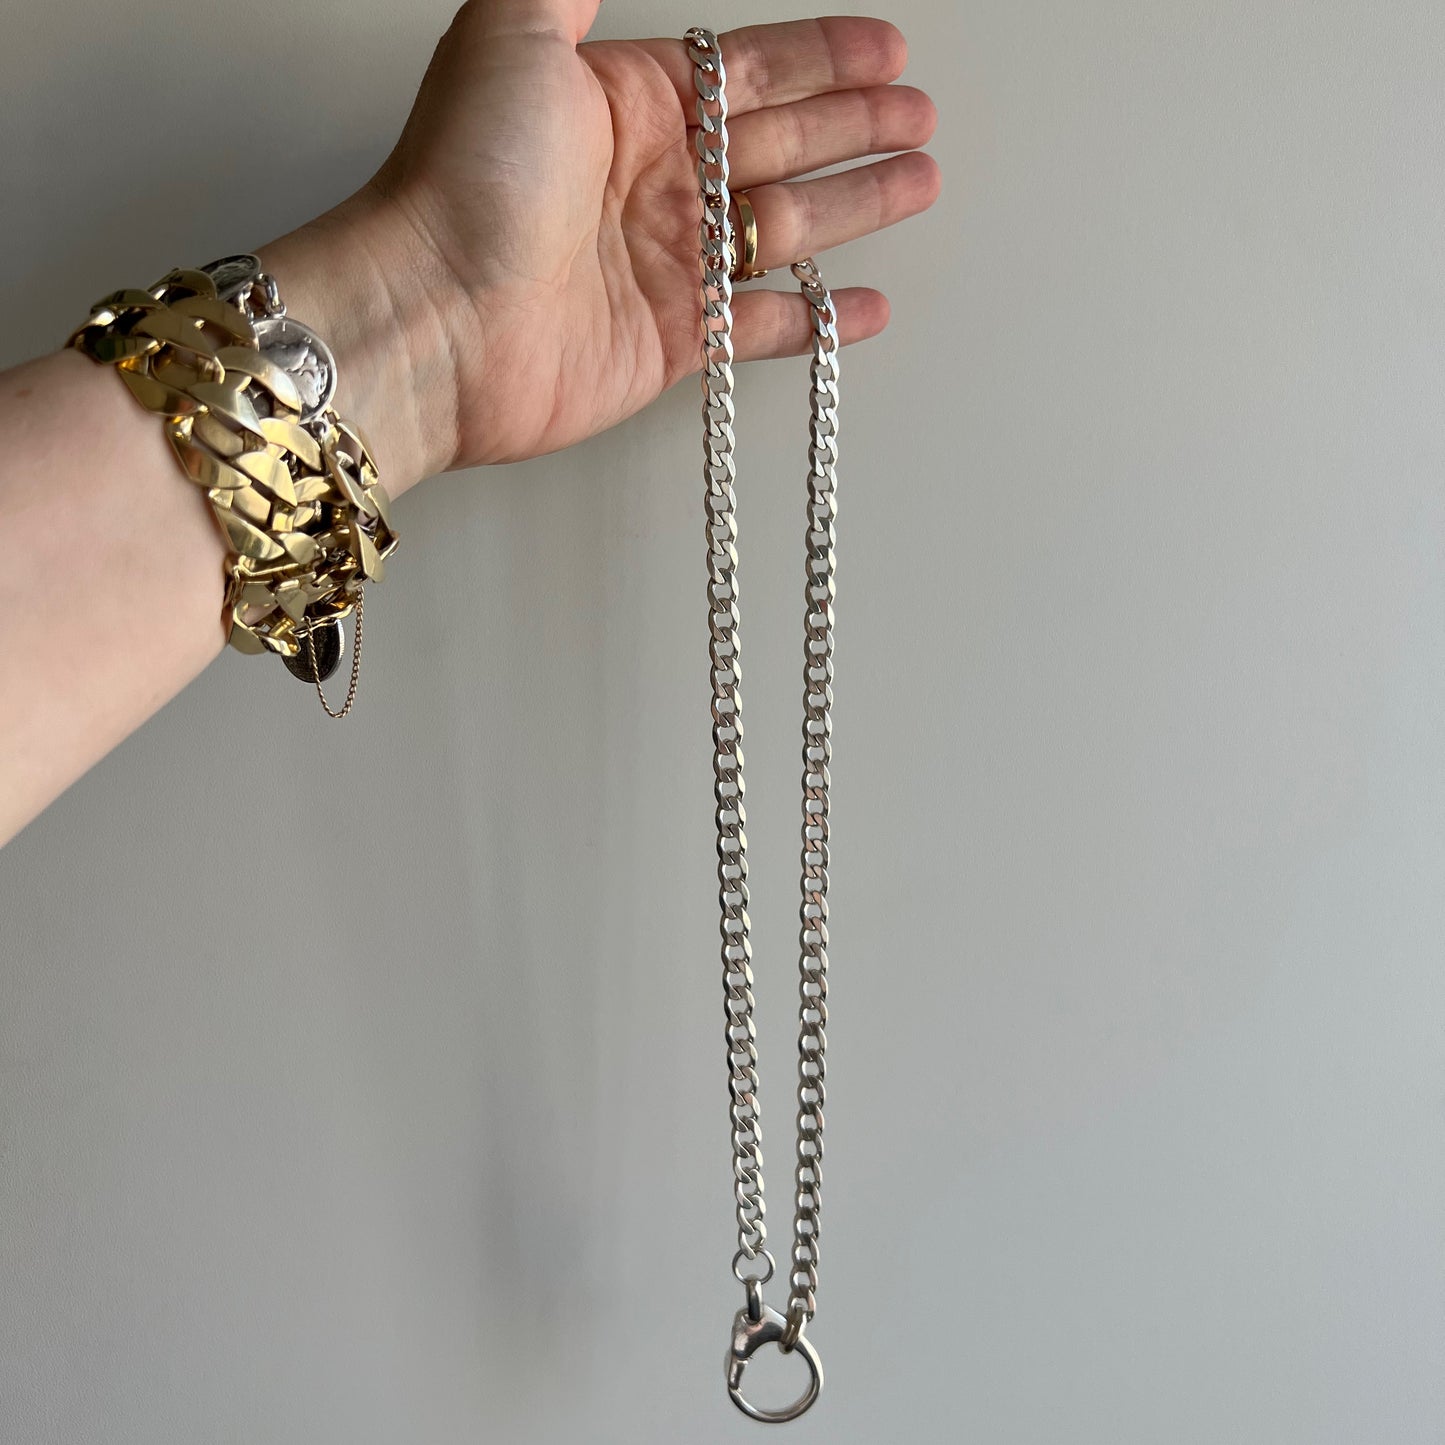 reimagined V I N T A G E // curb with a clip / sterling silver curb chain with oversized clip pendant holder clasp / 24.5", 50g